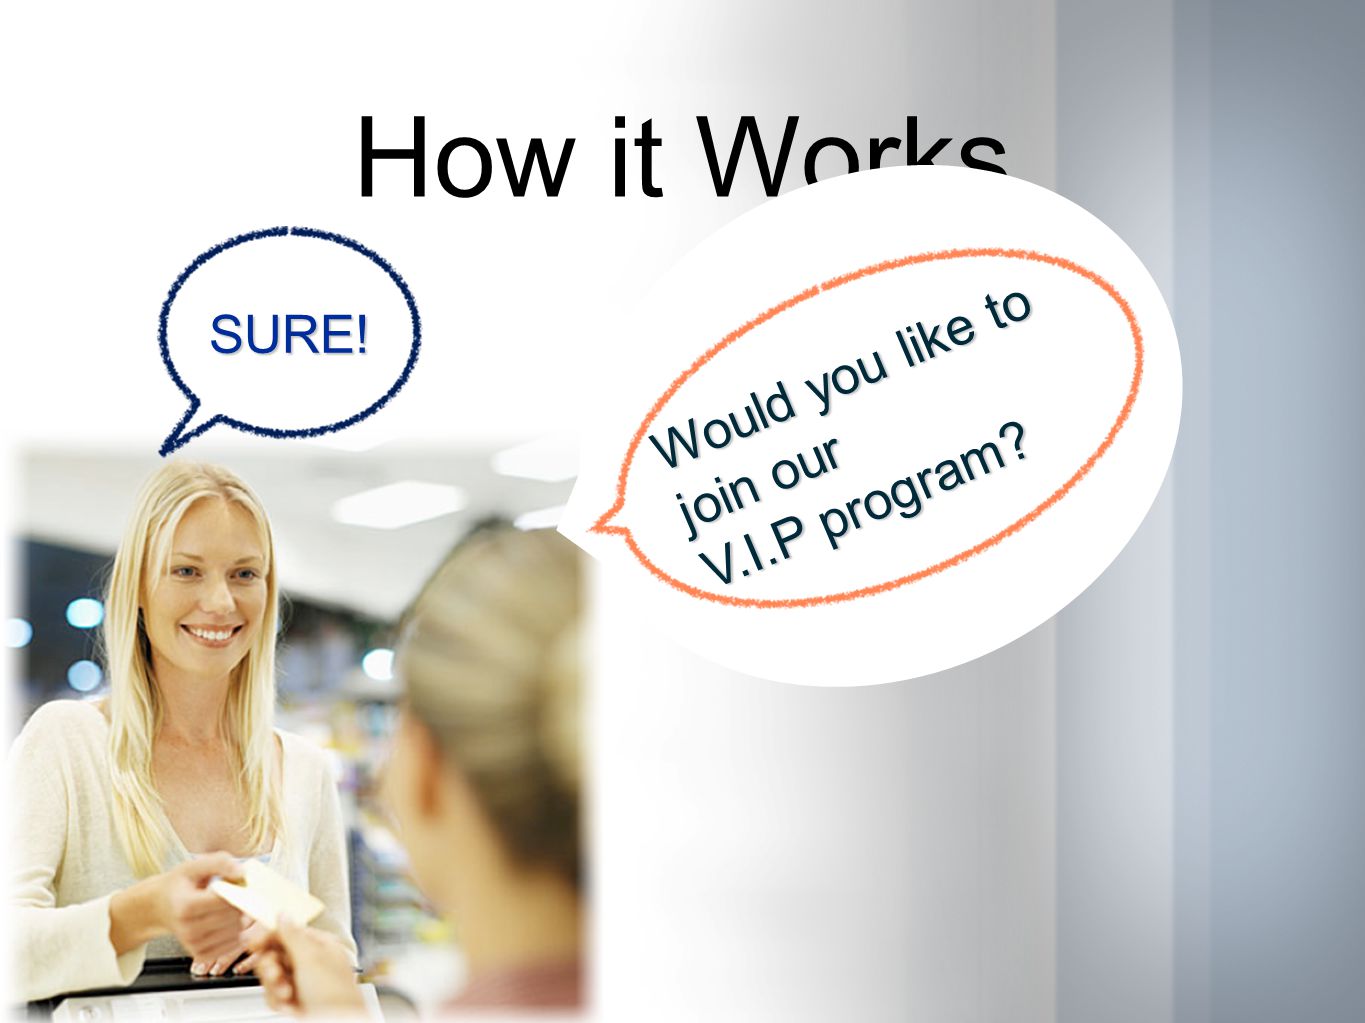 How it Works Would you like to join our V.I.P program SURE!